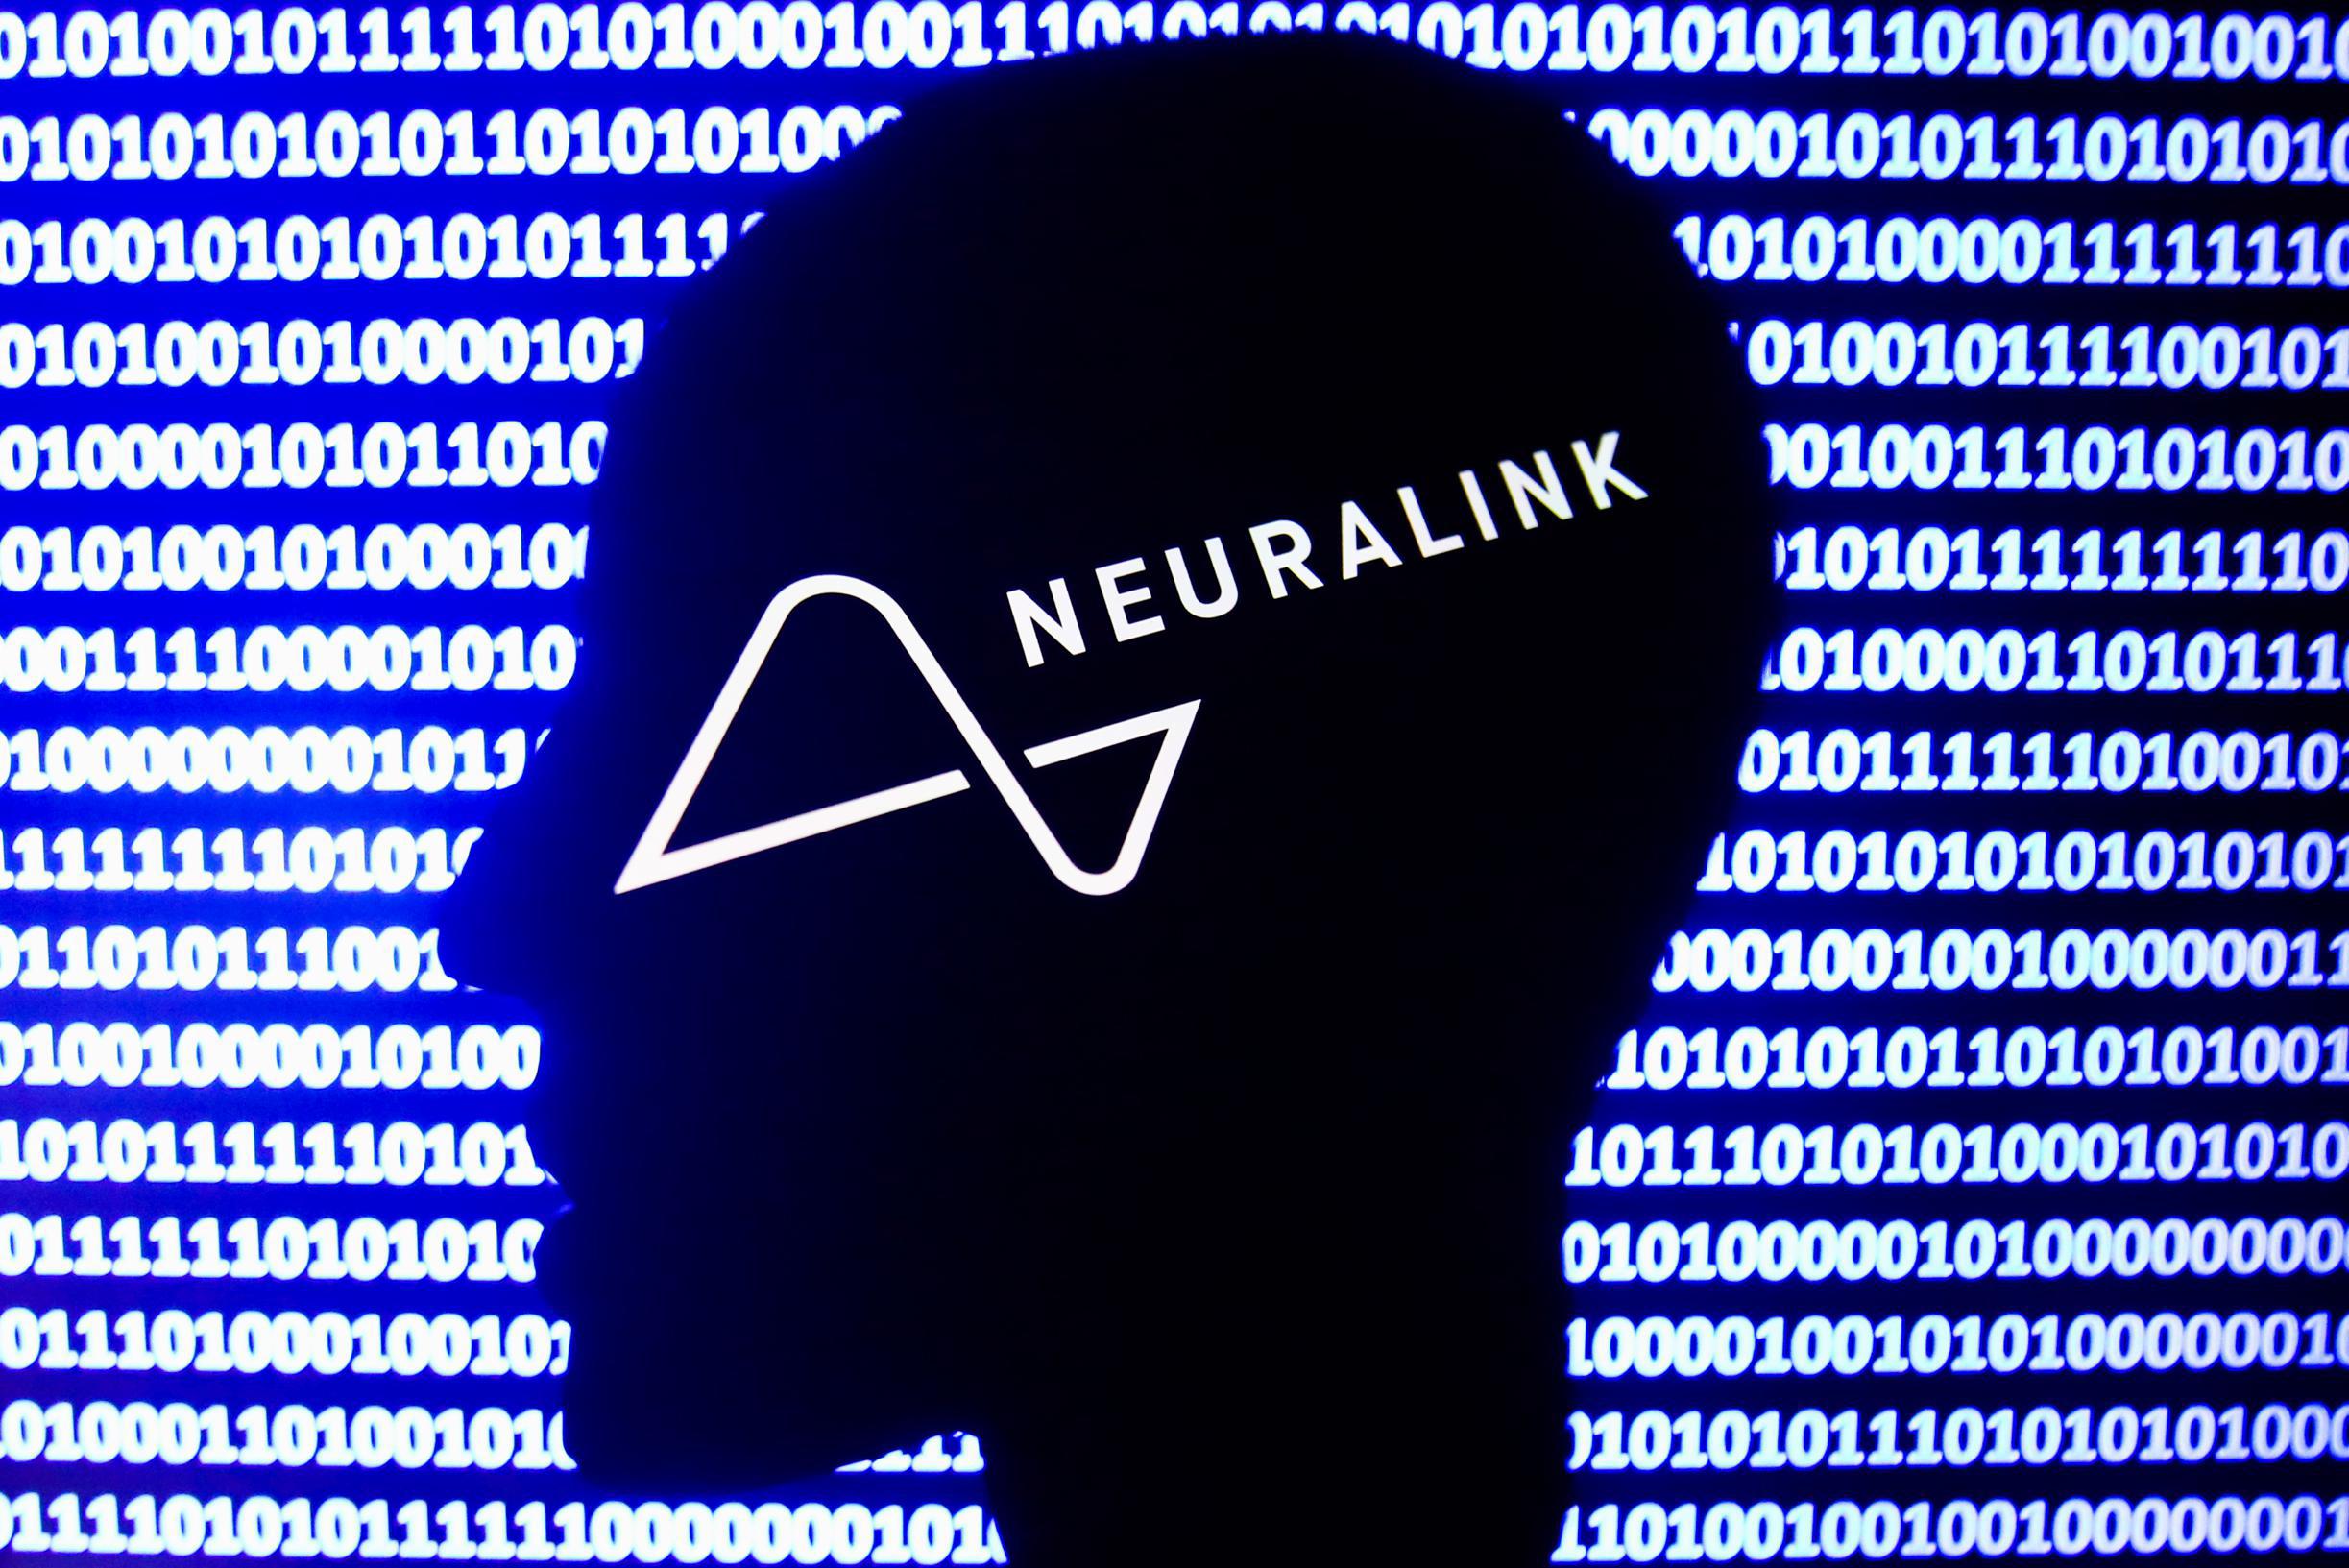 Musk’s company wants approval for revolutionary brain implants within six months